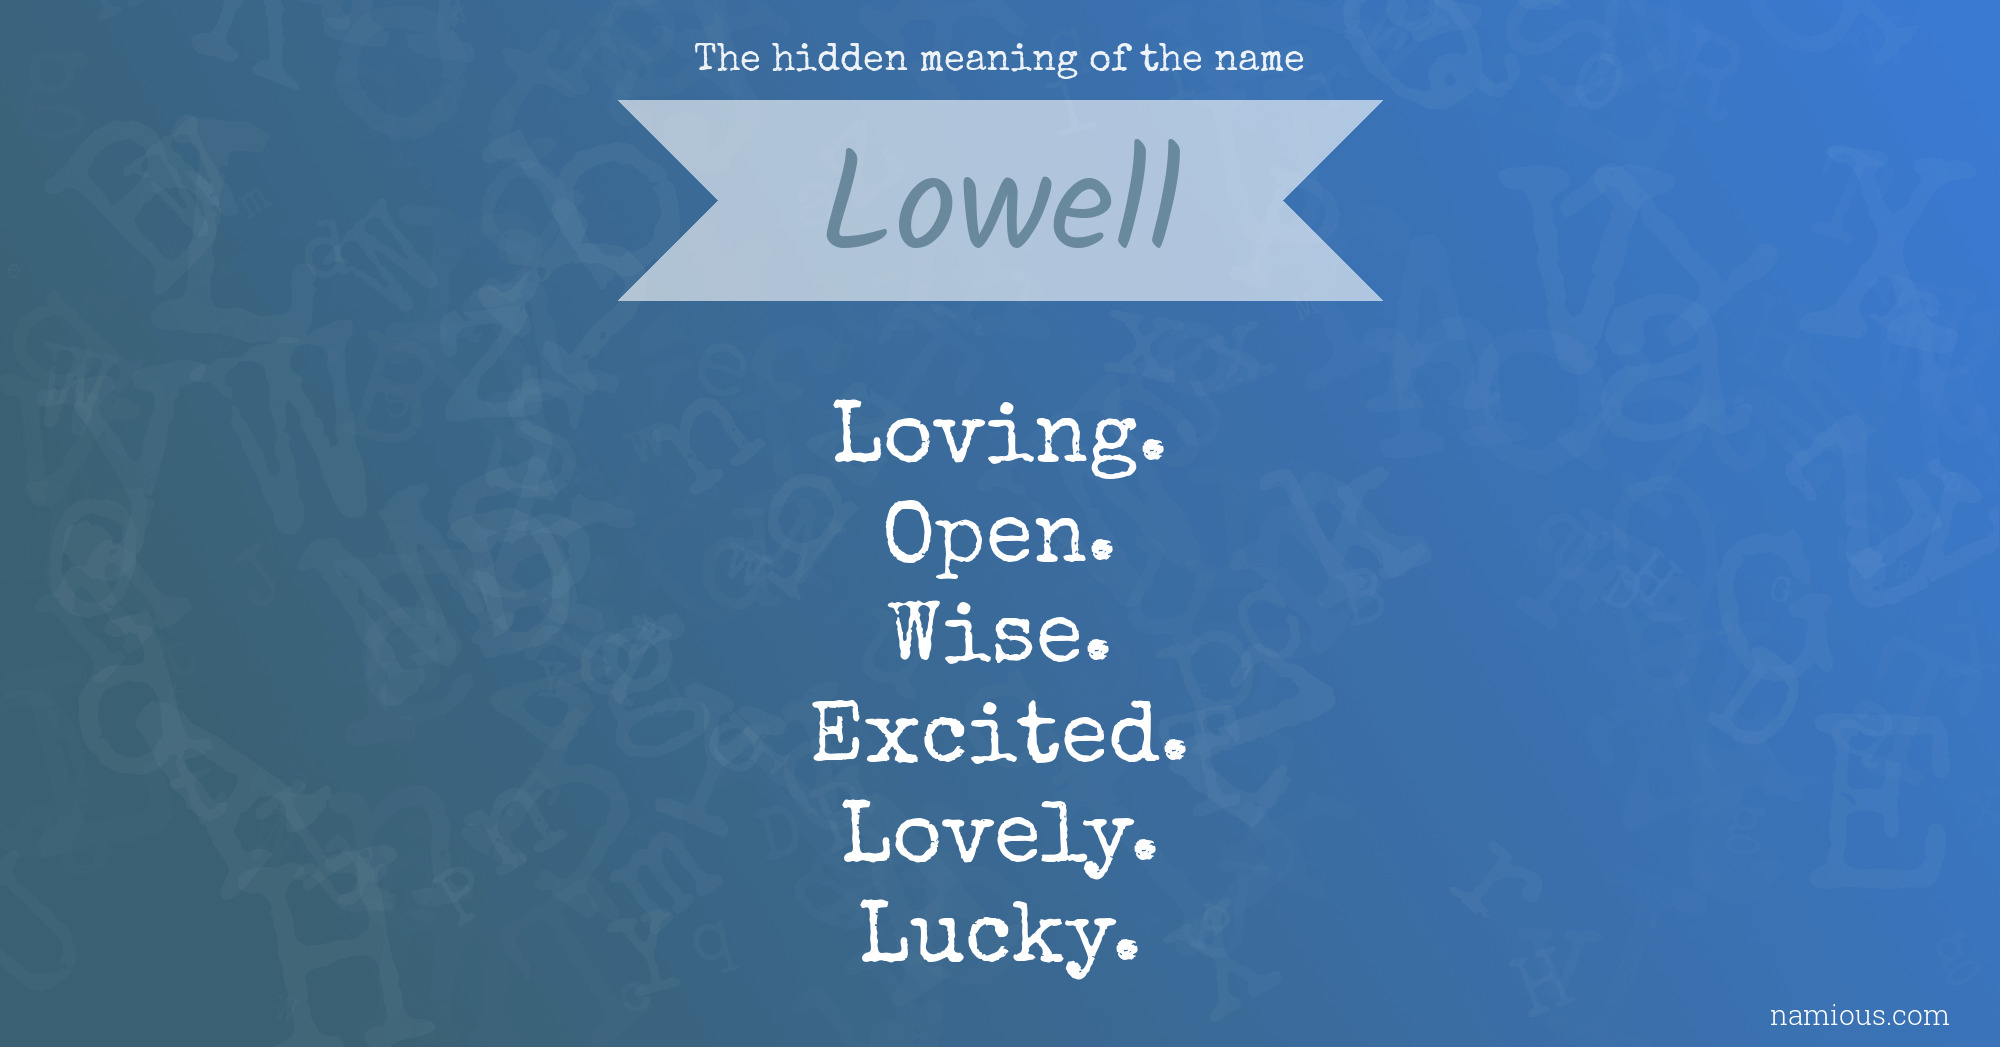 The hidden meaning of the name Lowell